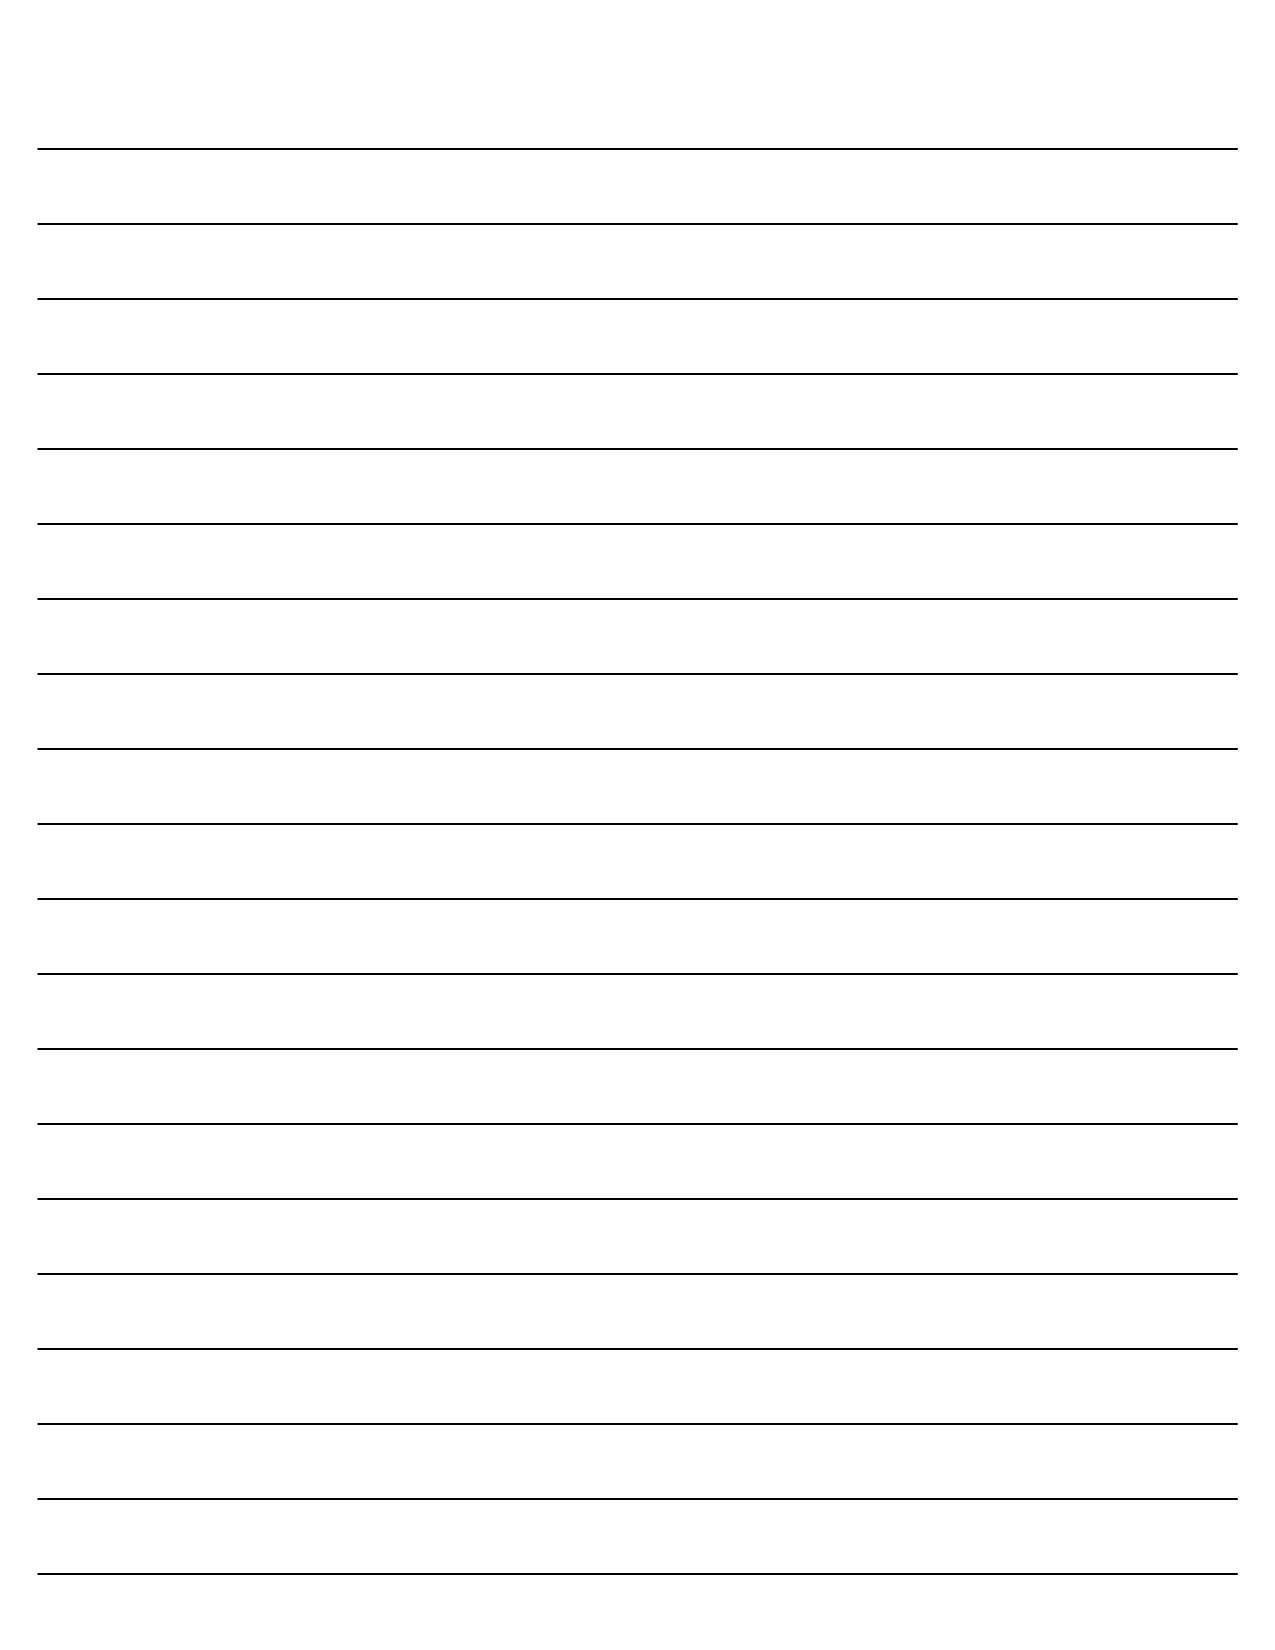 Free Printable Lined Writing Paper Template | Printables | Pinterest - Free Printable Notebook Paper